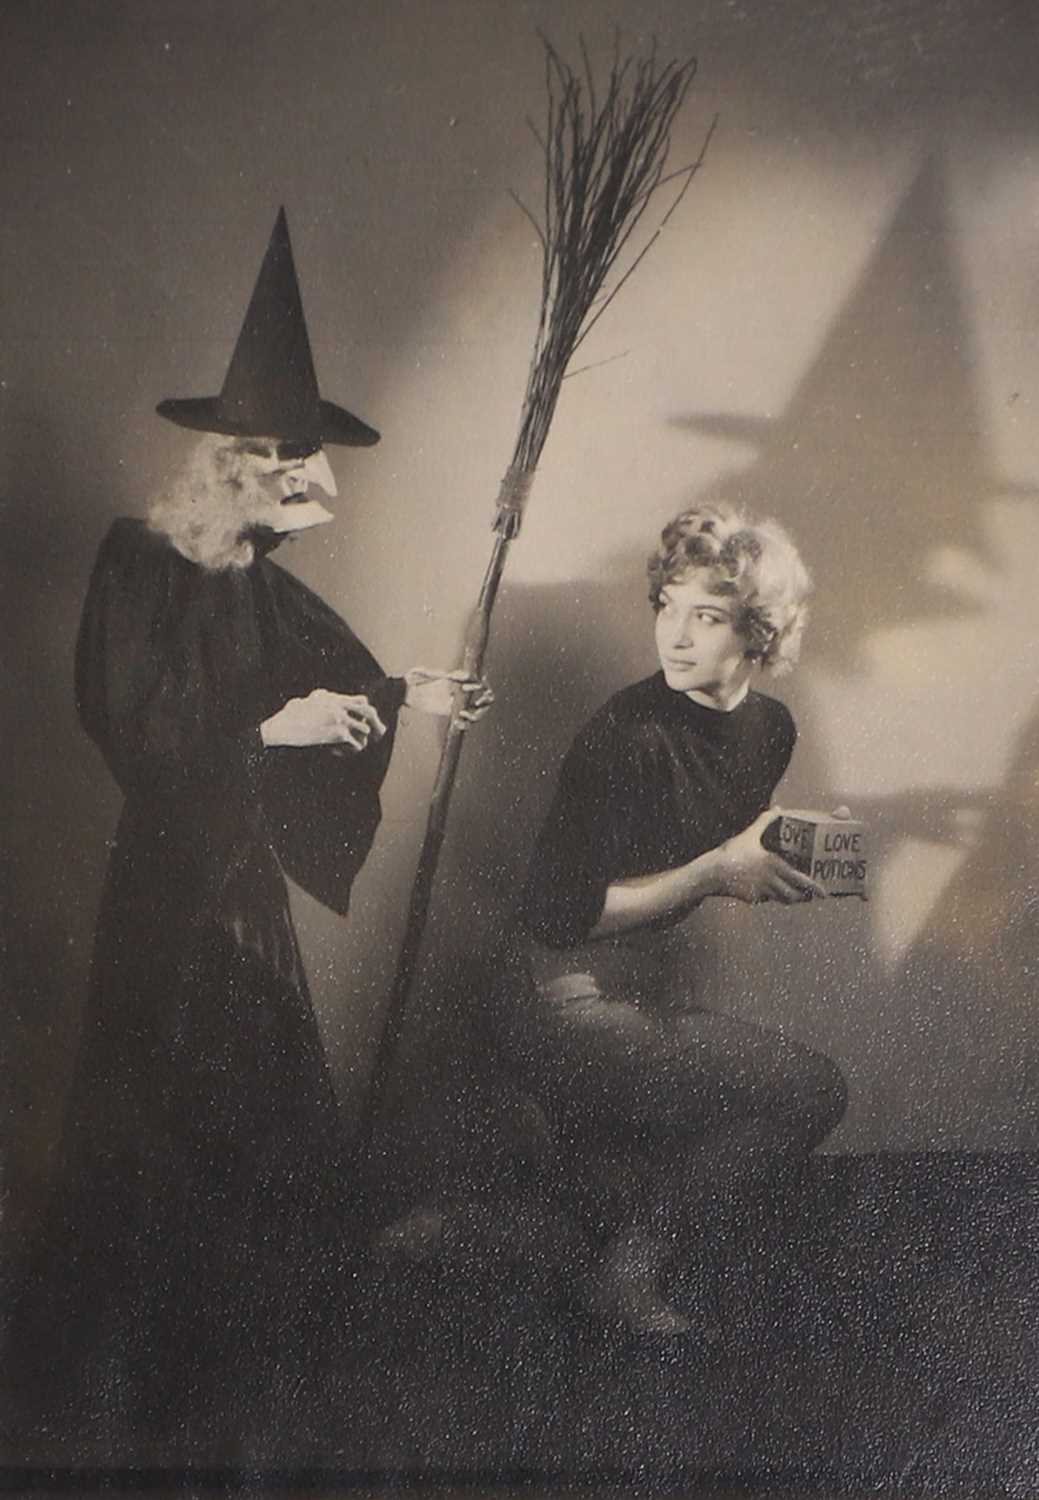 Lot 51 - The witch's curse photograph